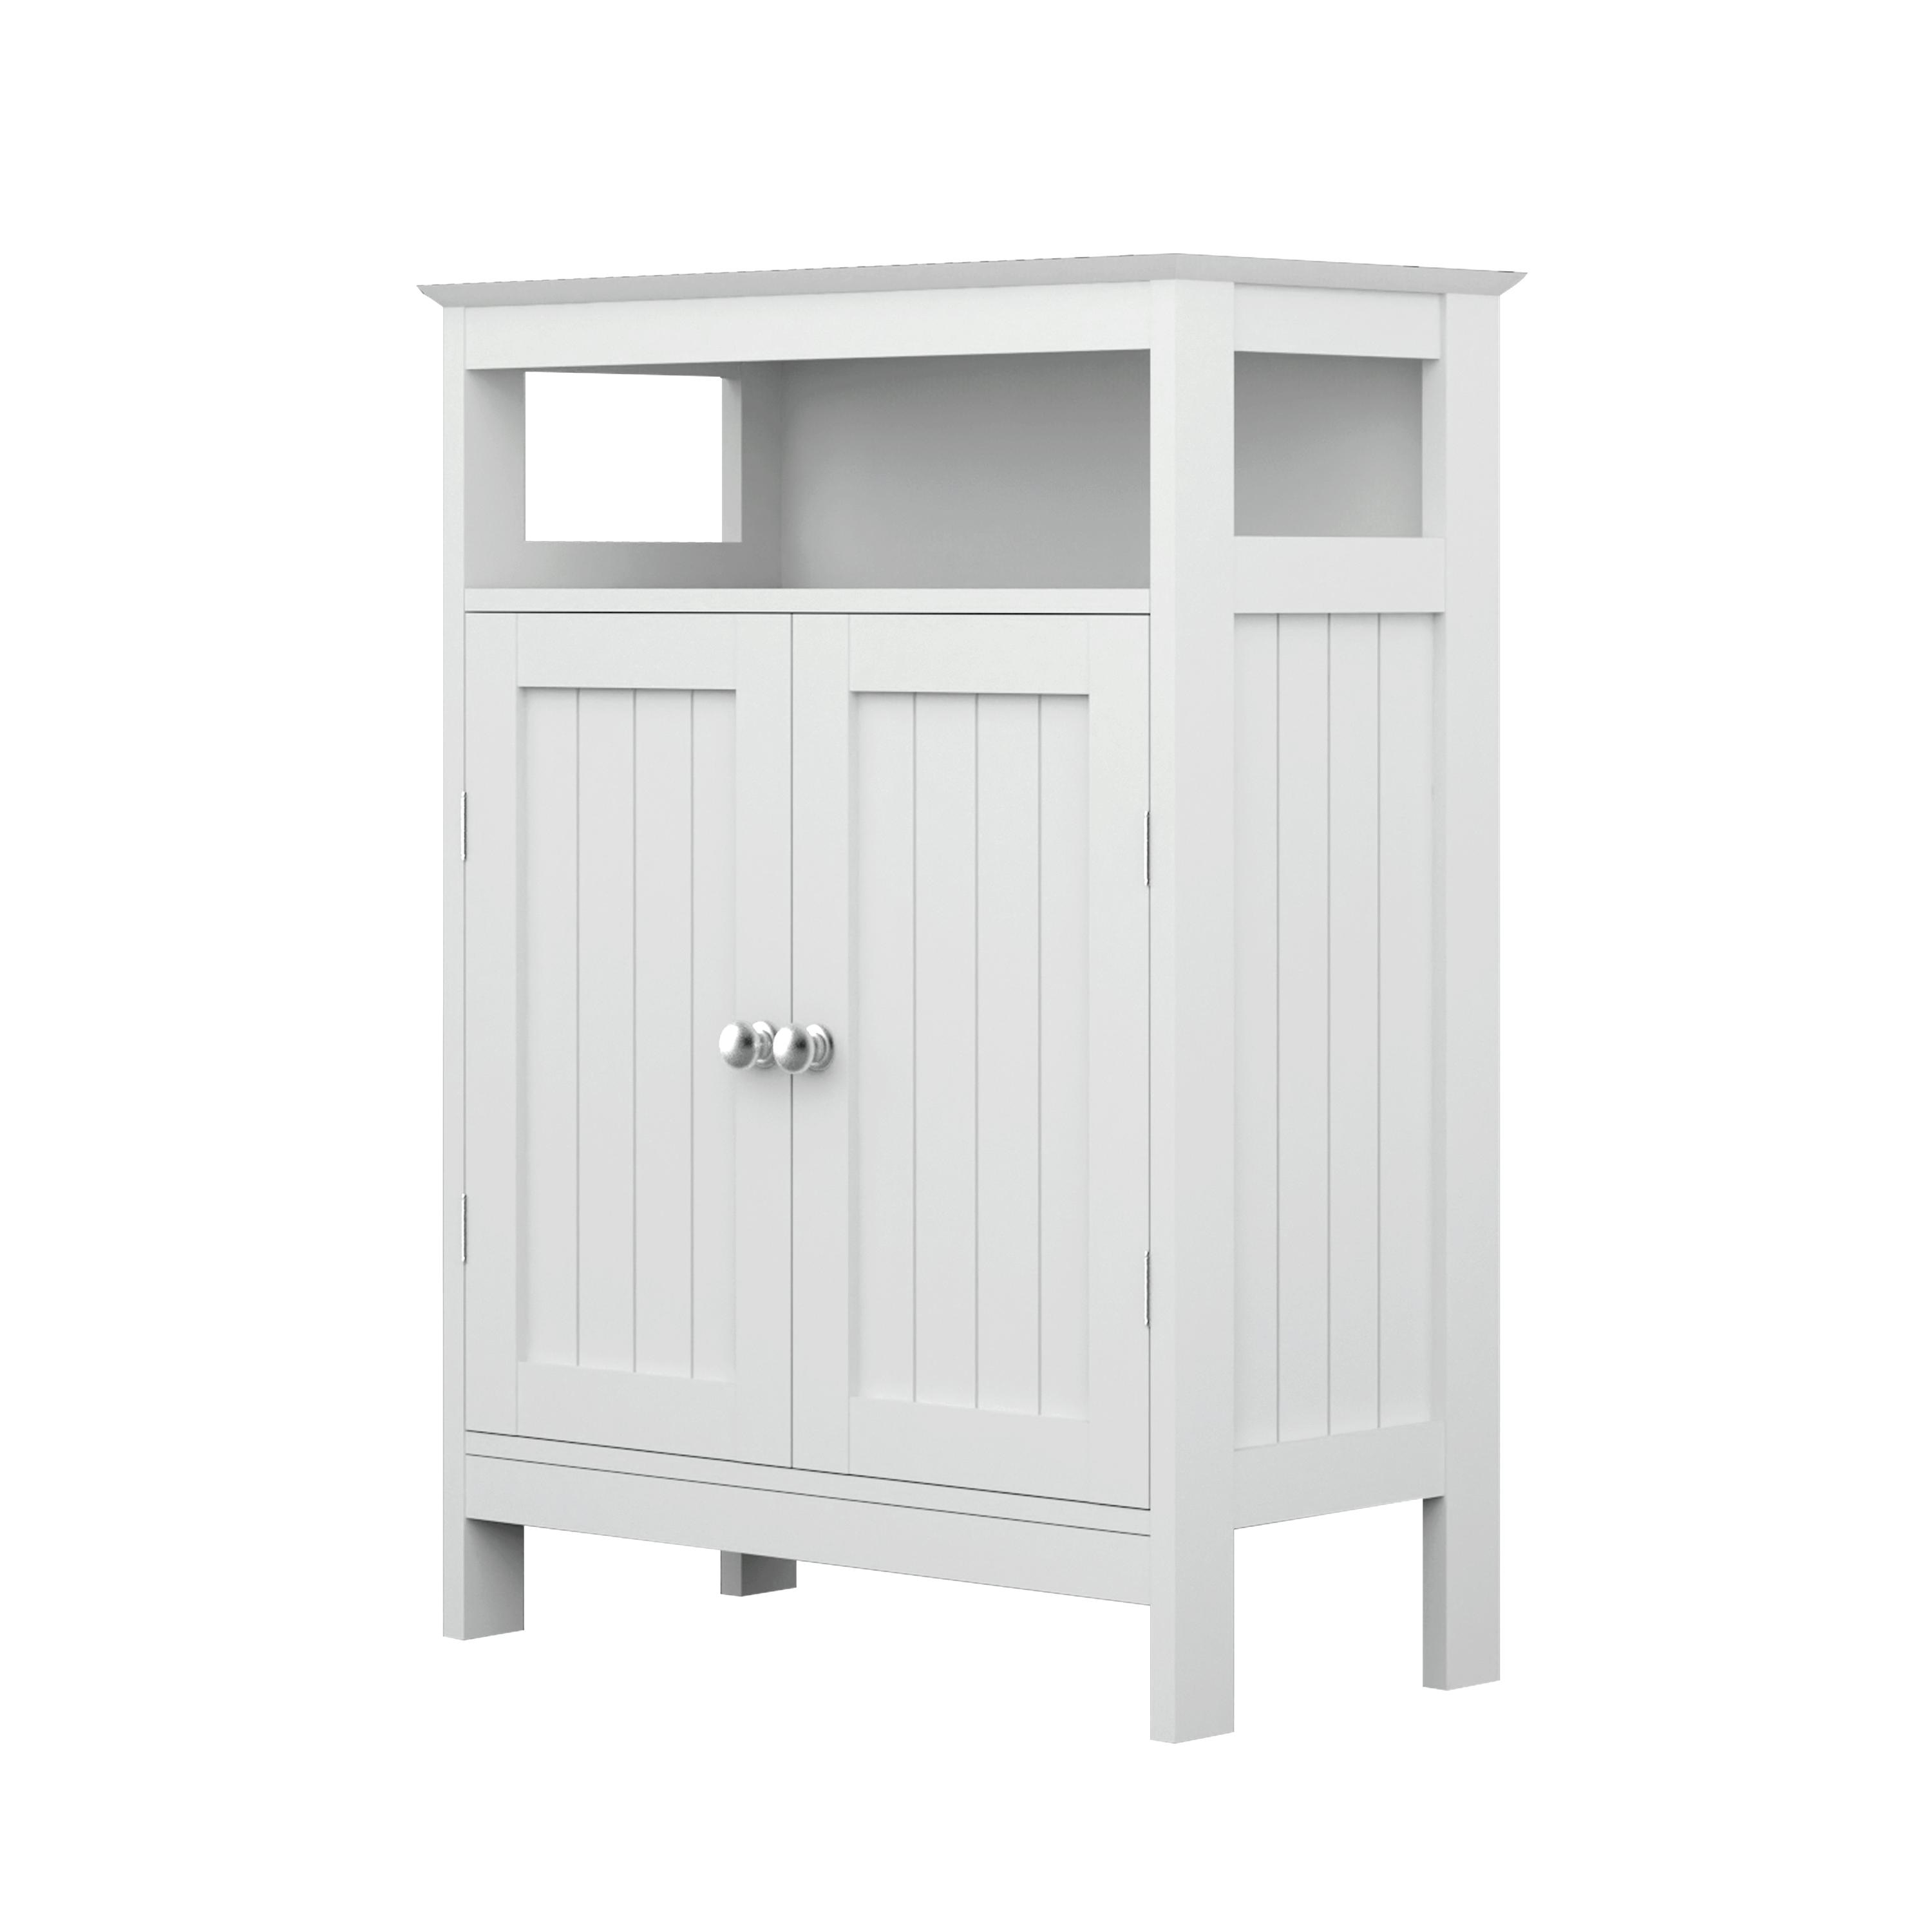 https://ak1.ostkcdn.com/images/products/is/images/direct/e8017caa99c1bb55e7c4eb5218243118181e8318/Bathroom-standing-storage-cabinet.jpg